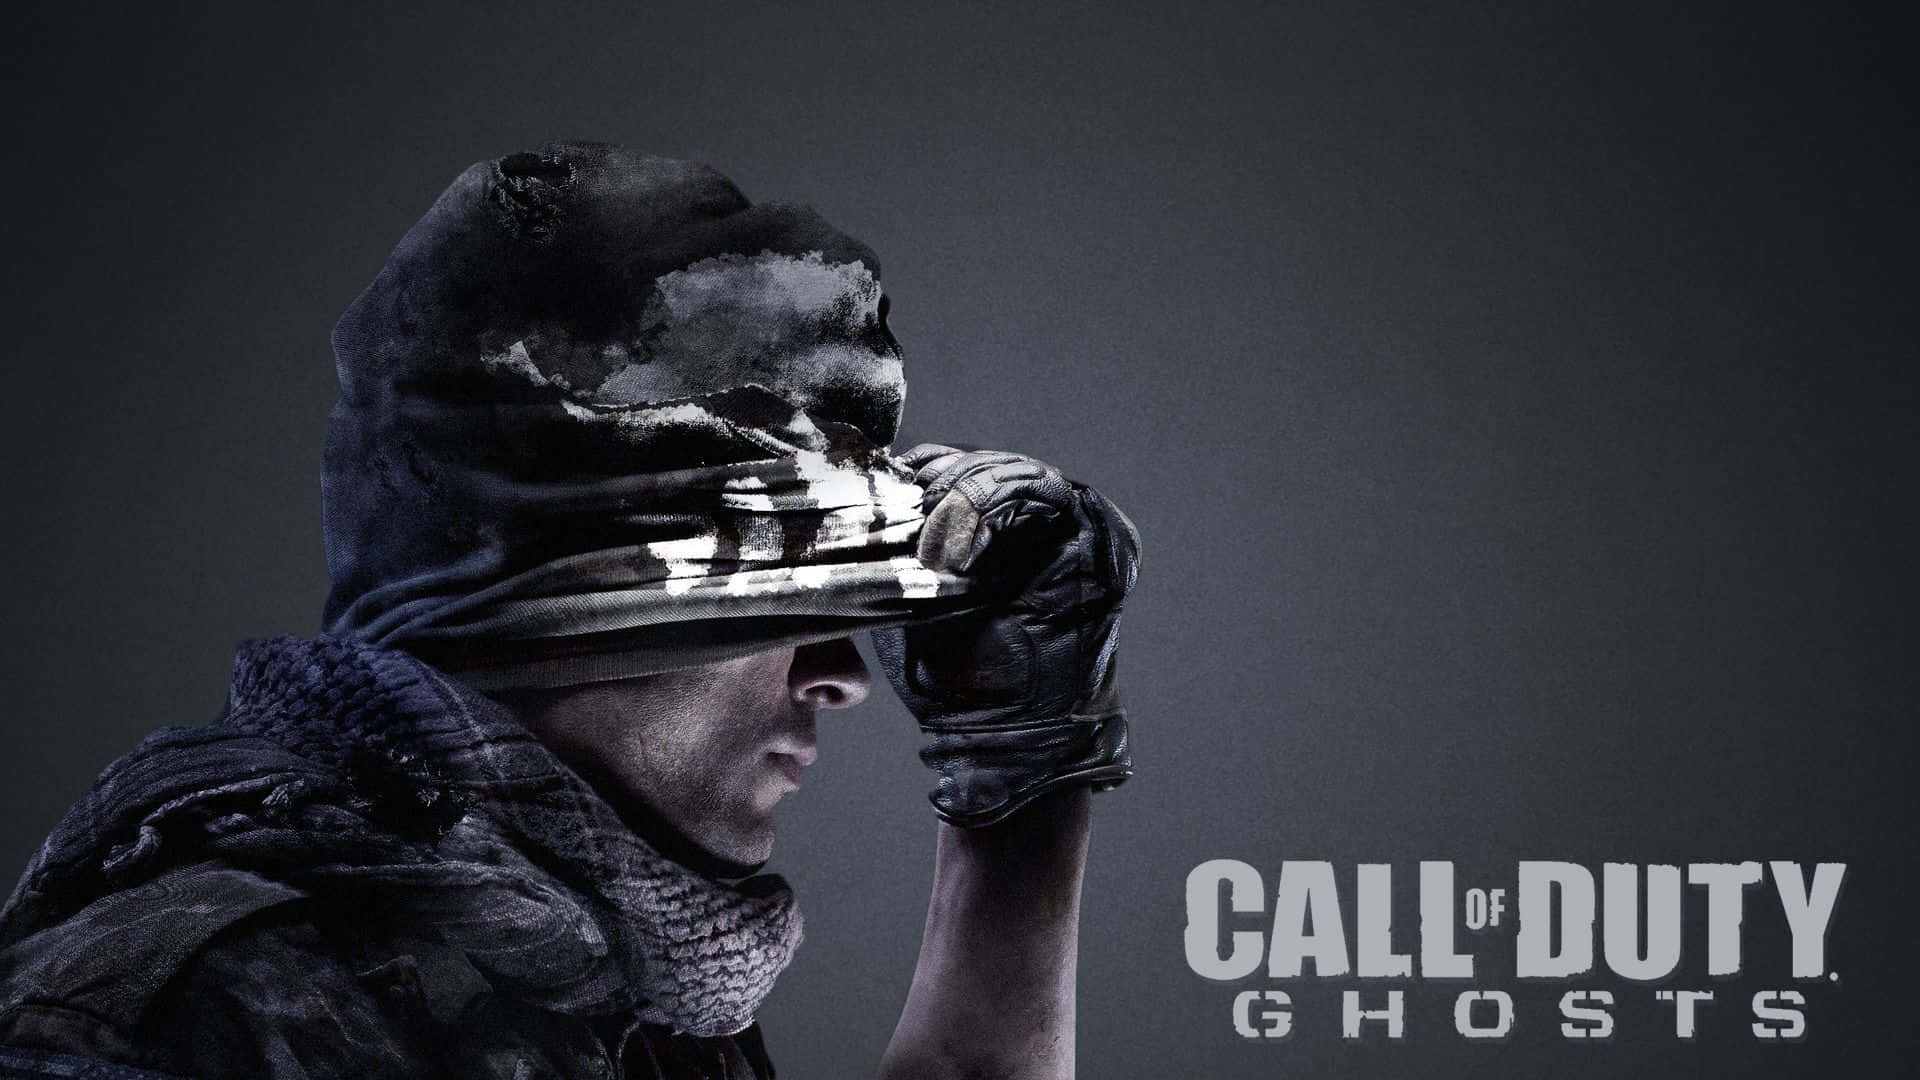 Intense Action in Call of Duty: Ghosts Wallpaper